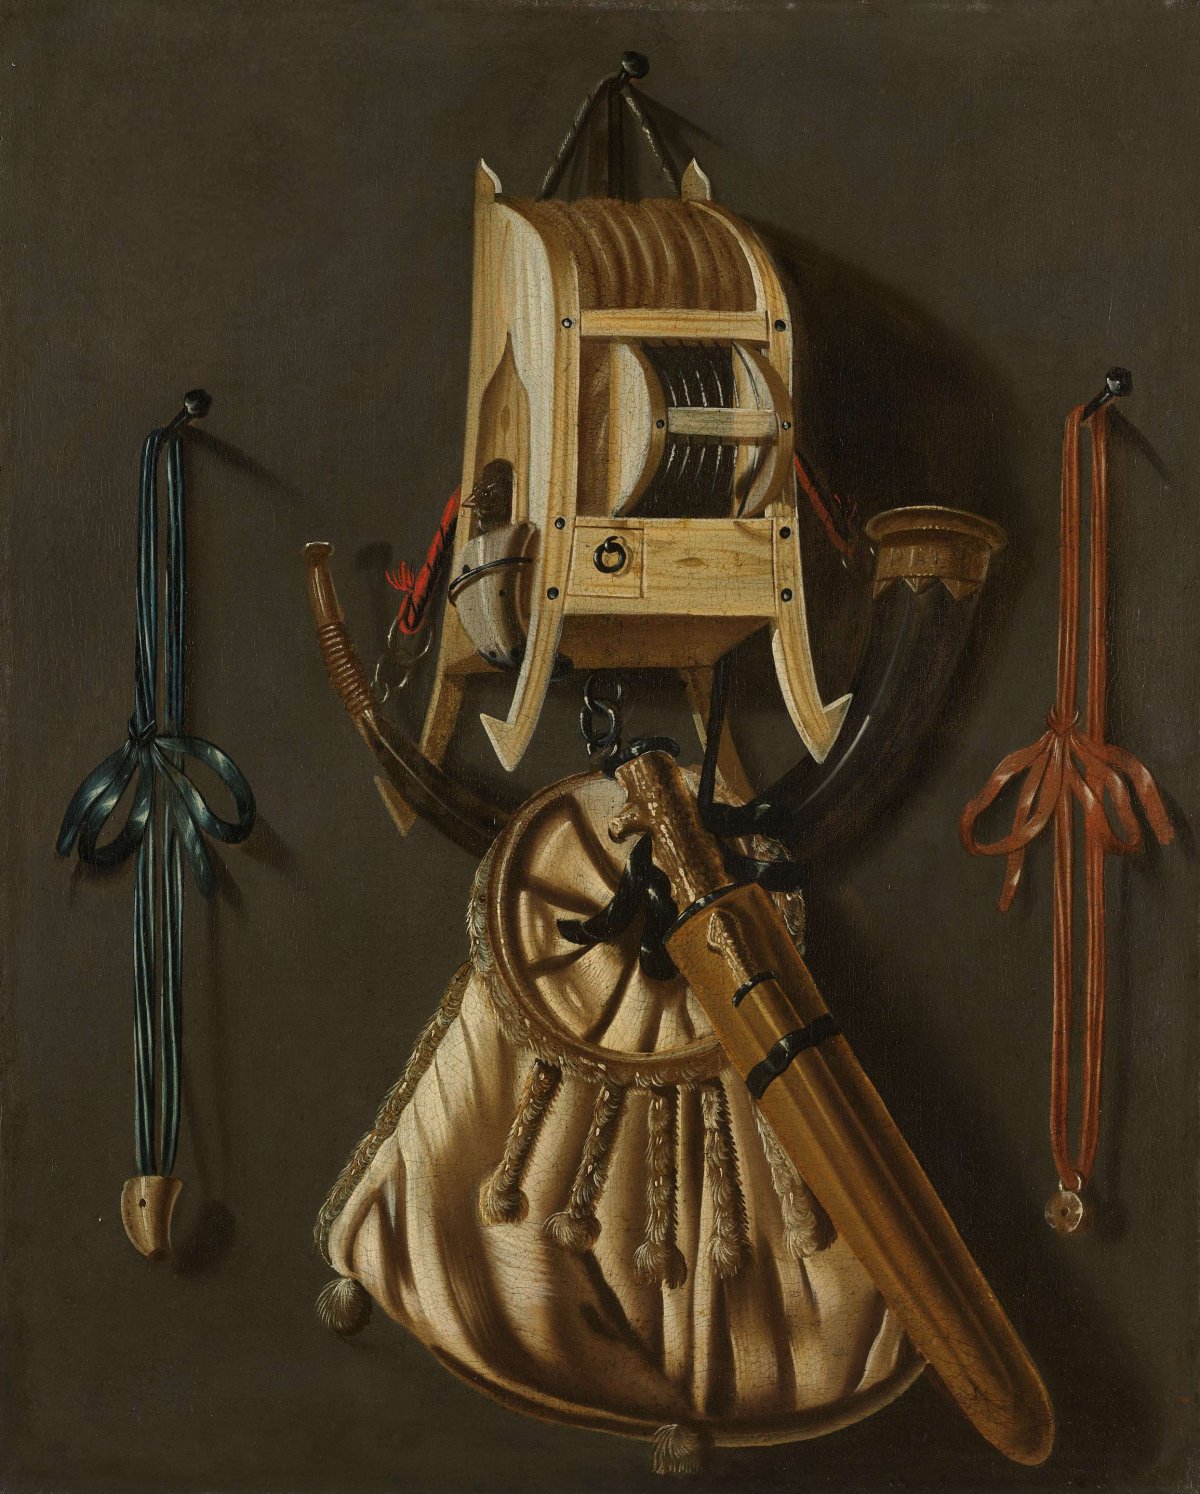 Still Life with Implements of the Hunt, Johannes Leemans, 1670 - 1686